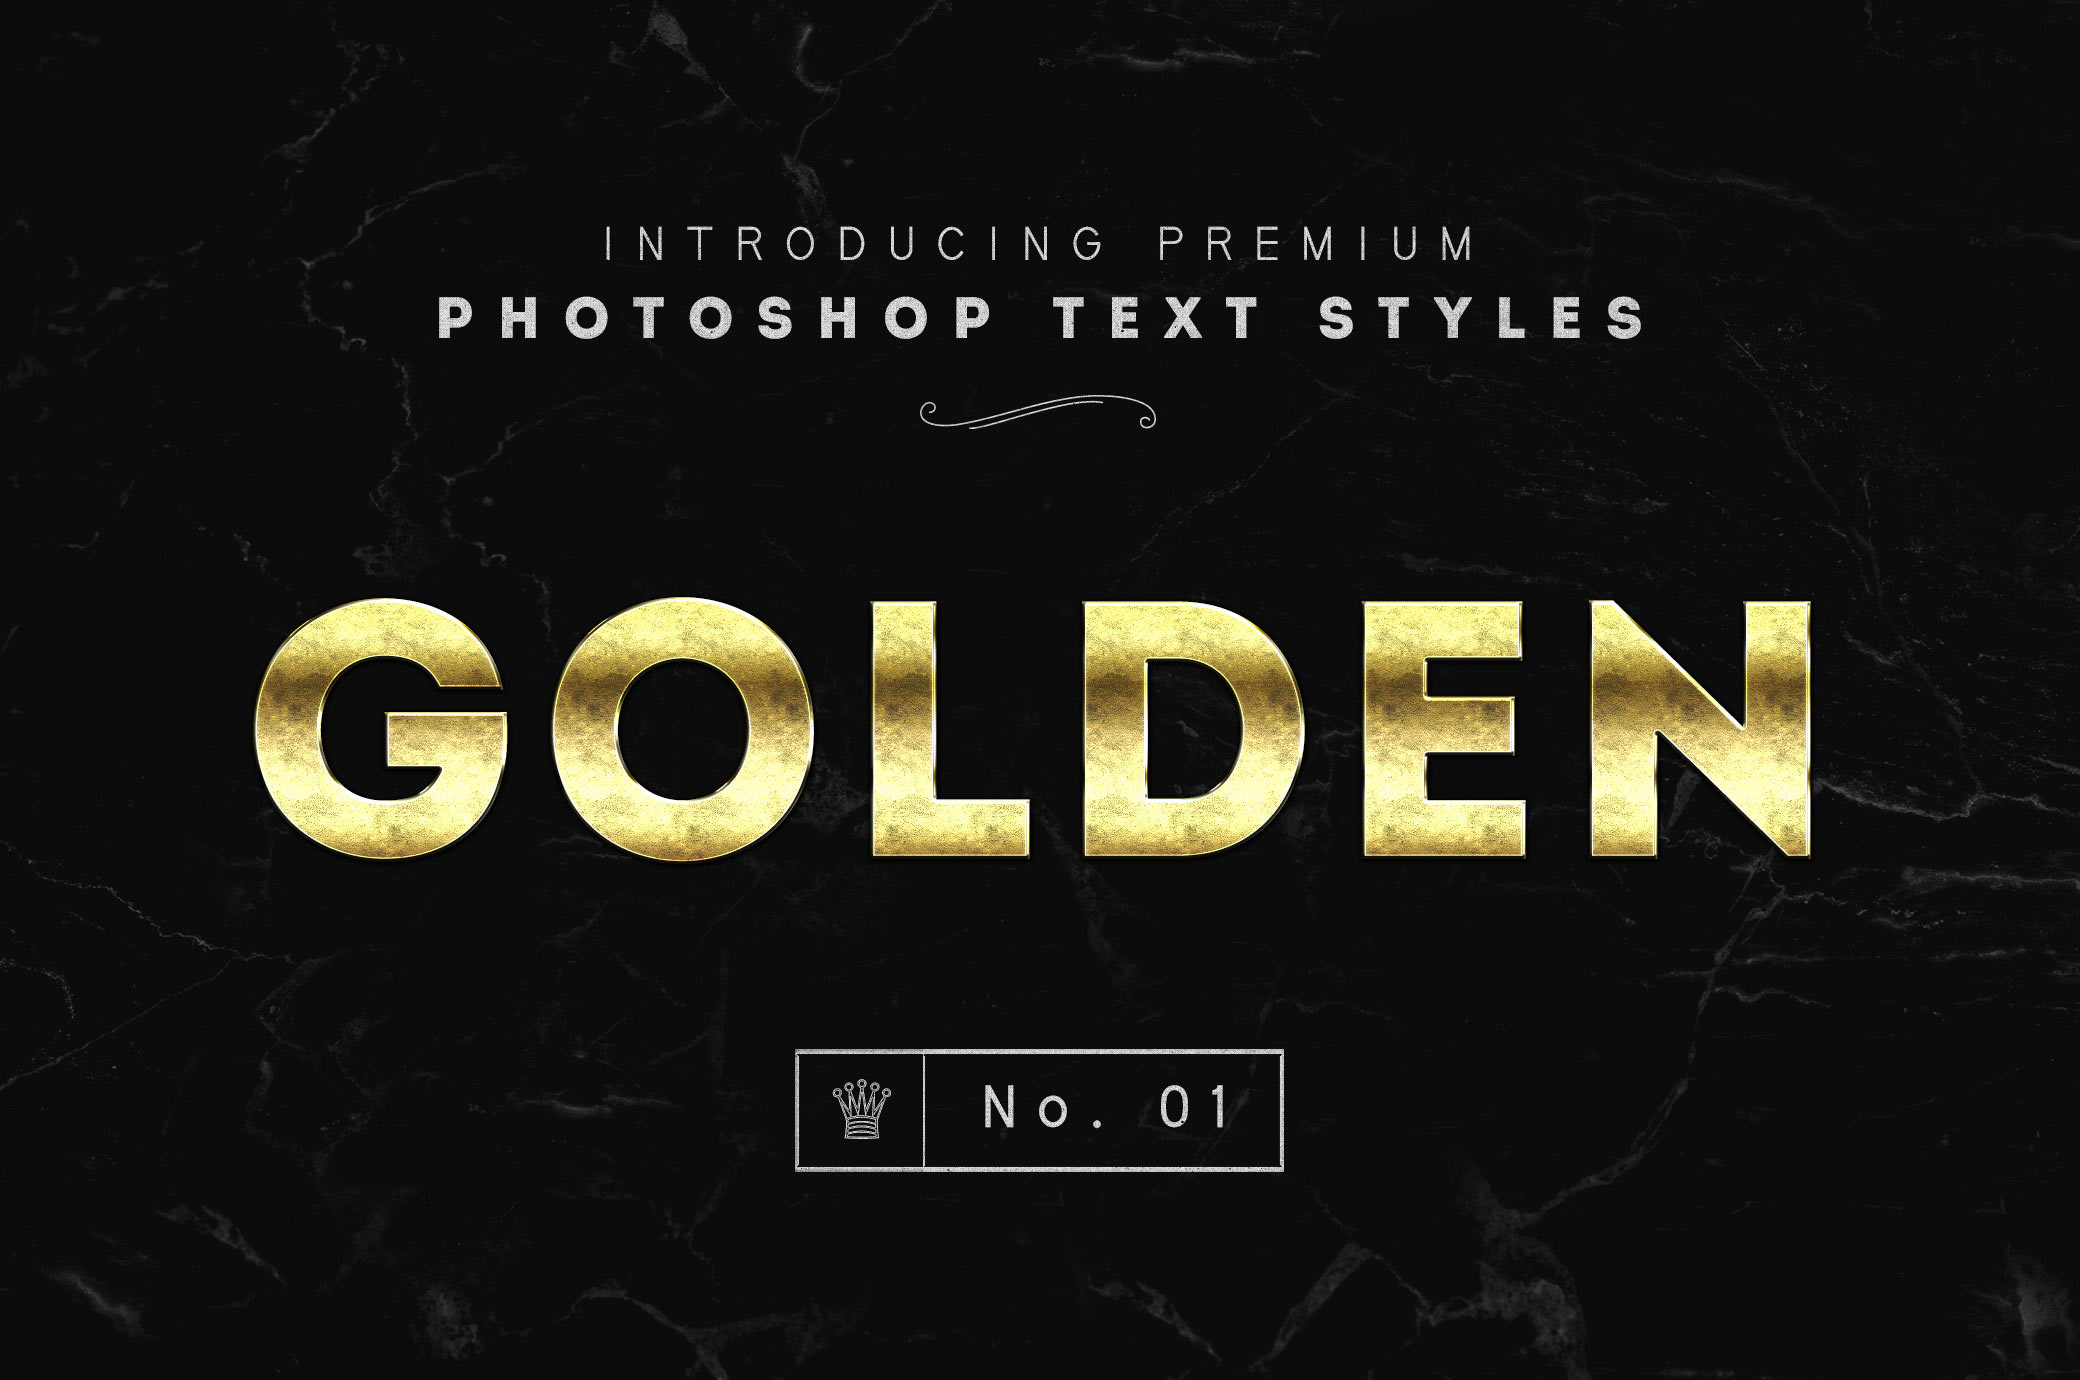 photoshop gold text style free download